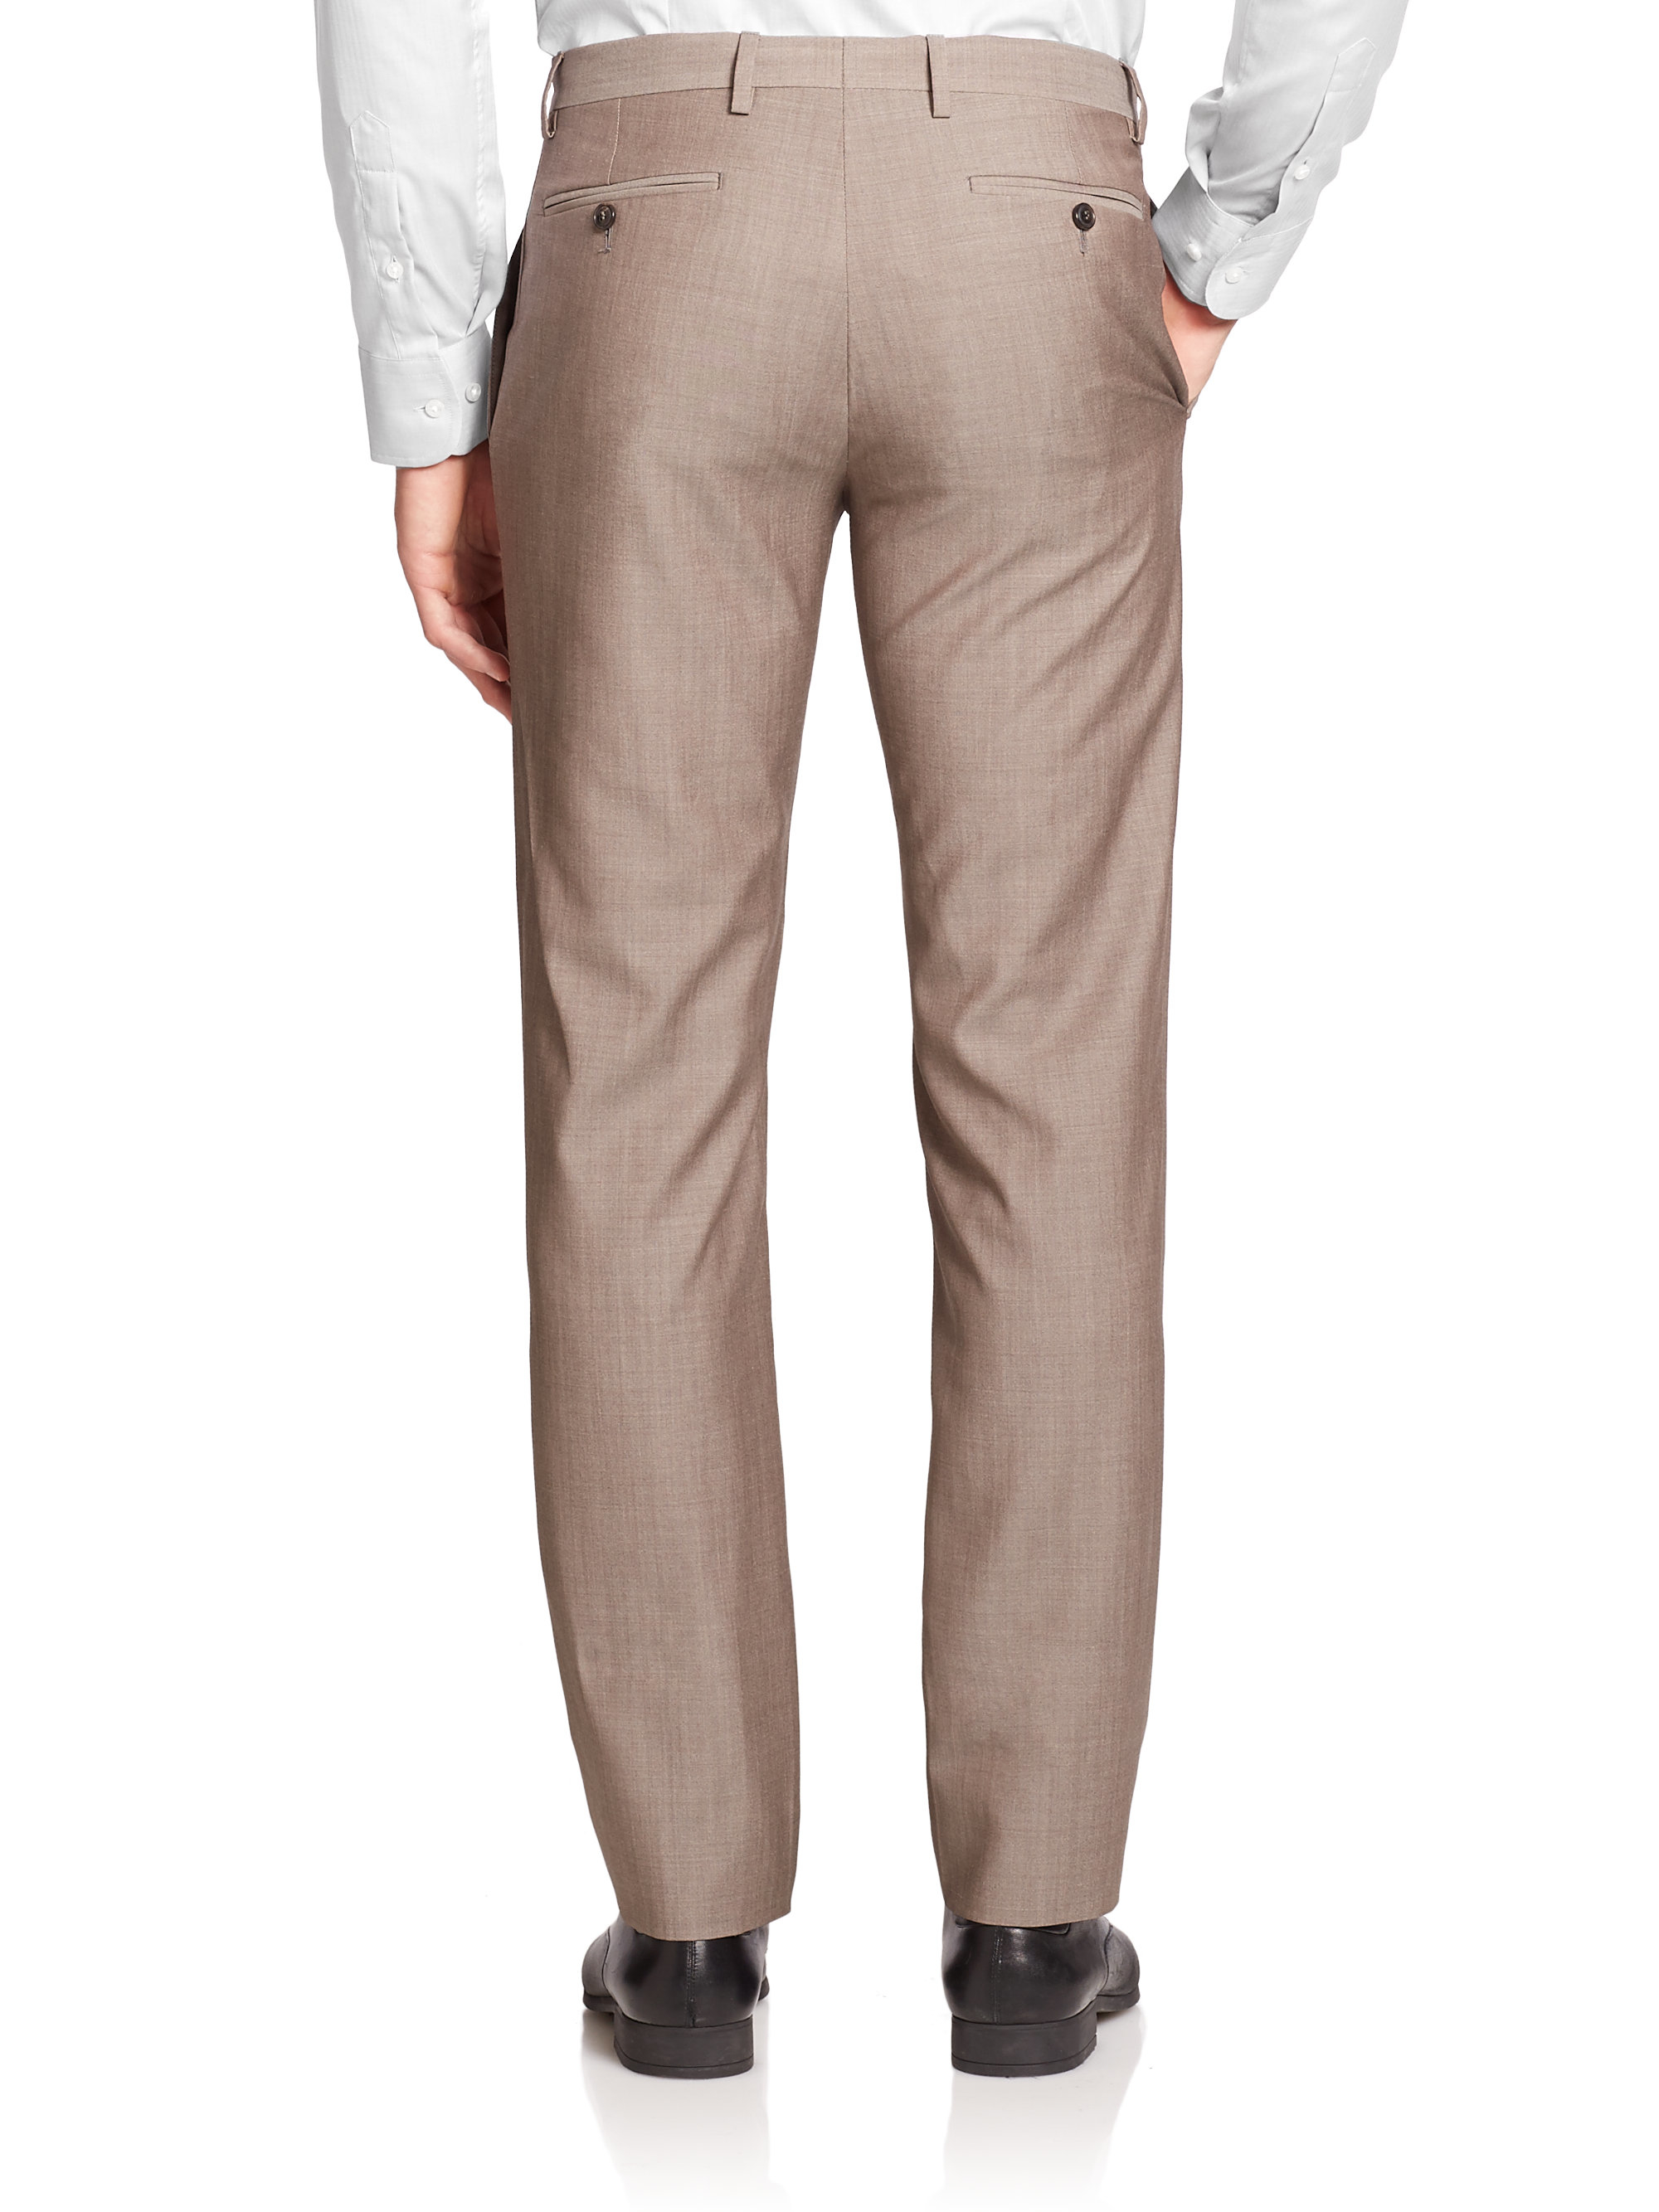 Giorgio Armani Textured Wool Dress Pants in Brown for Men - Lyst